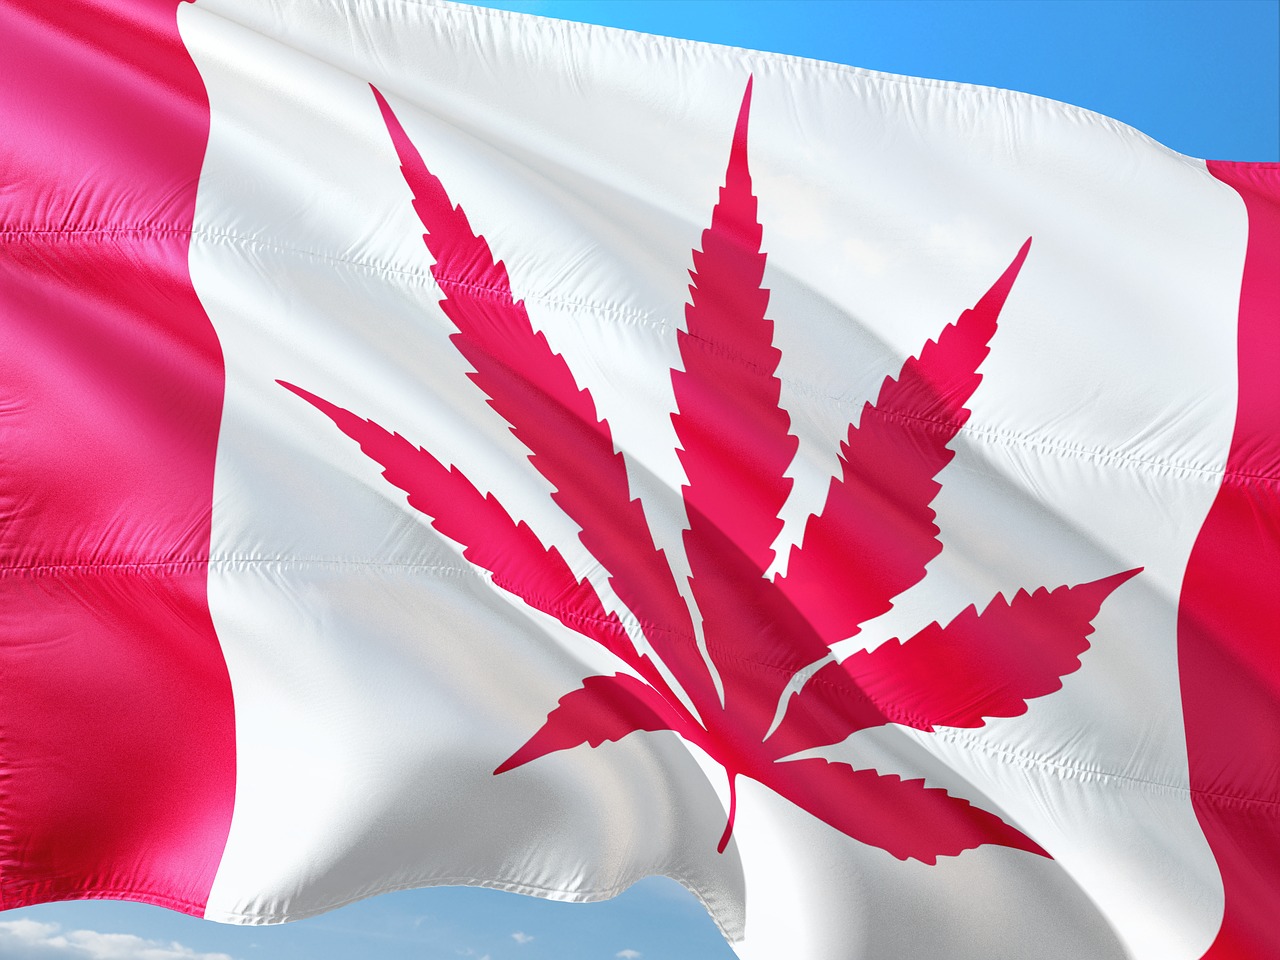 Flag of Canada with cannabis leaf replacing maple leaf, showing legalization of marijuana.